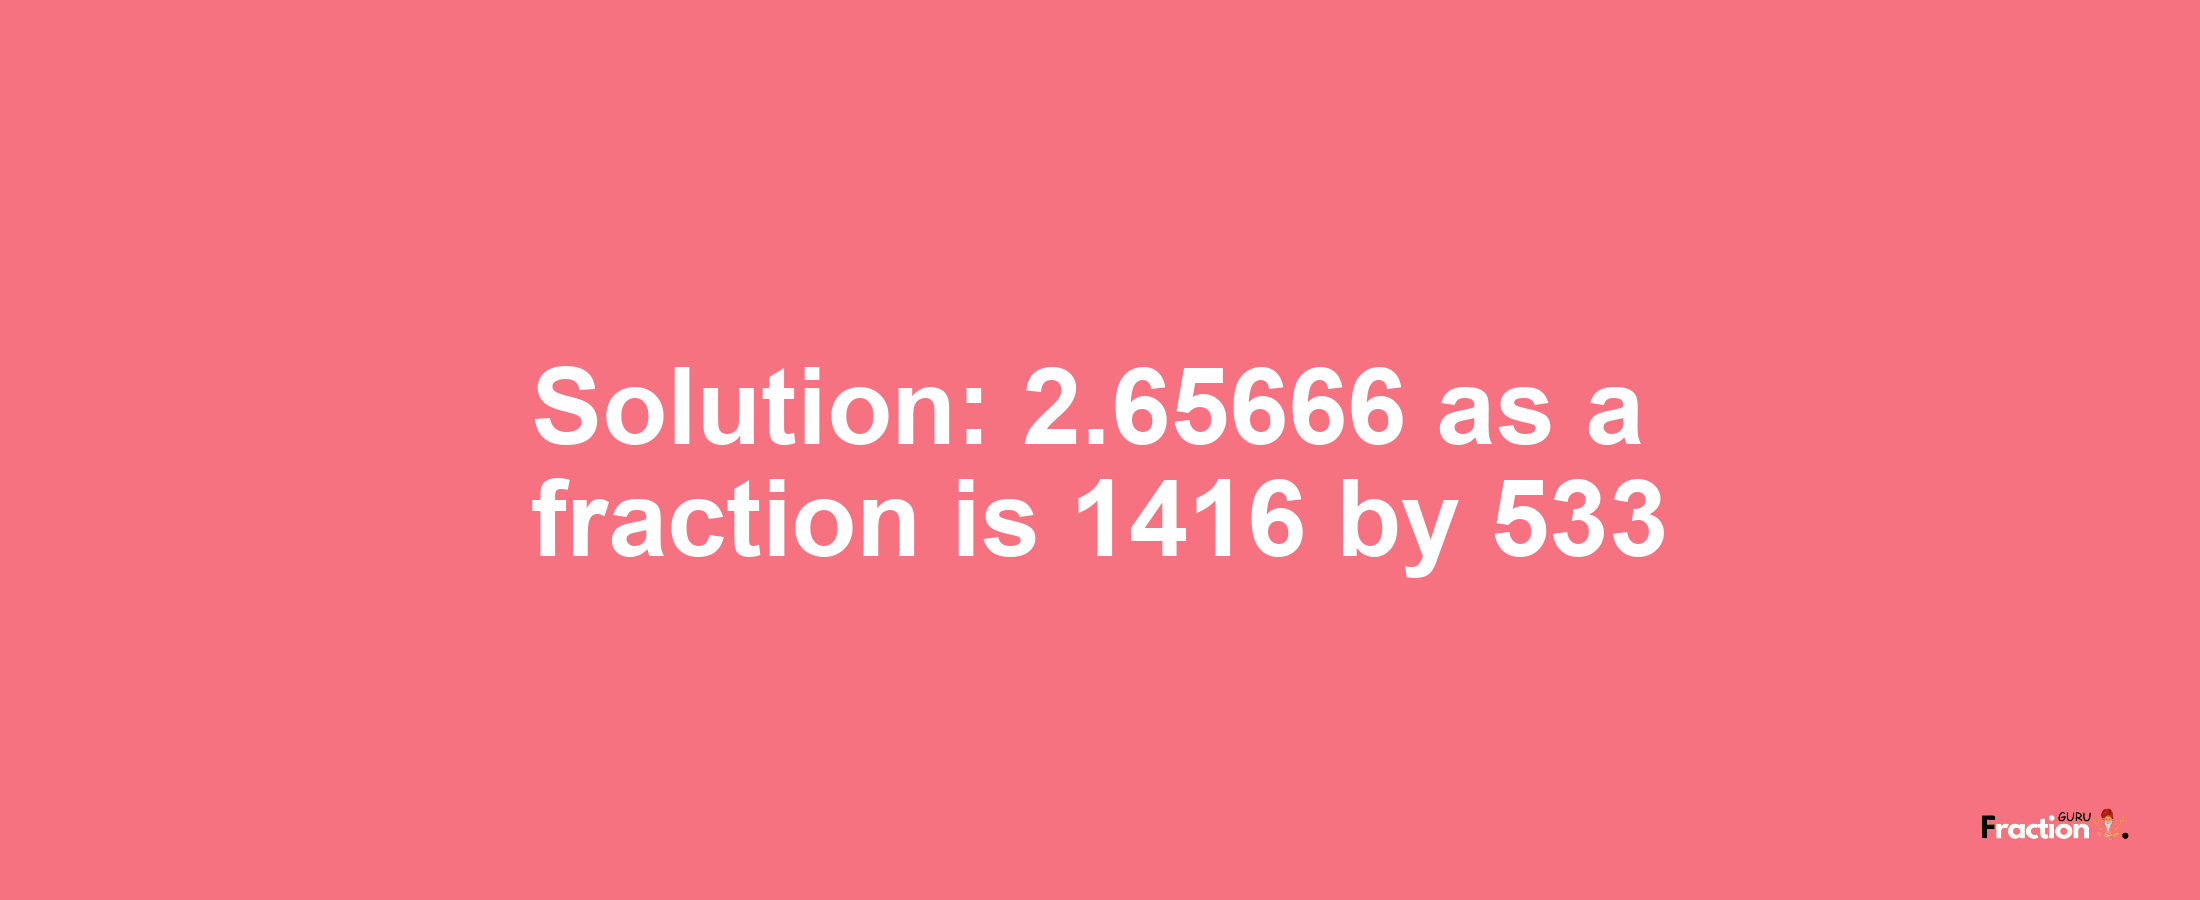 Solution:2.65666 as a fraction is 1416/533